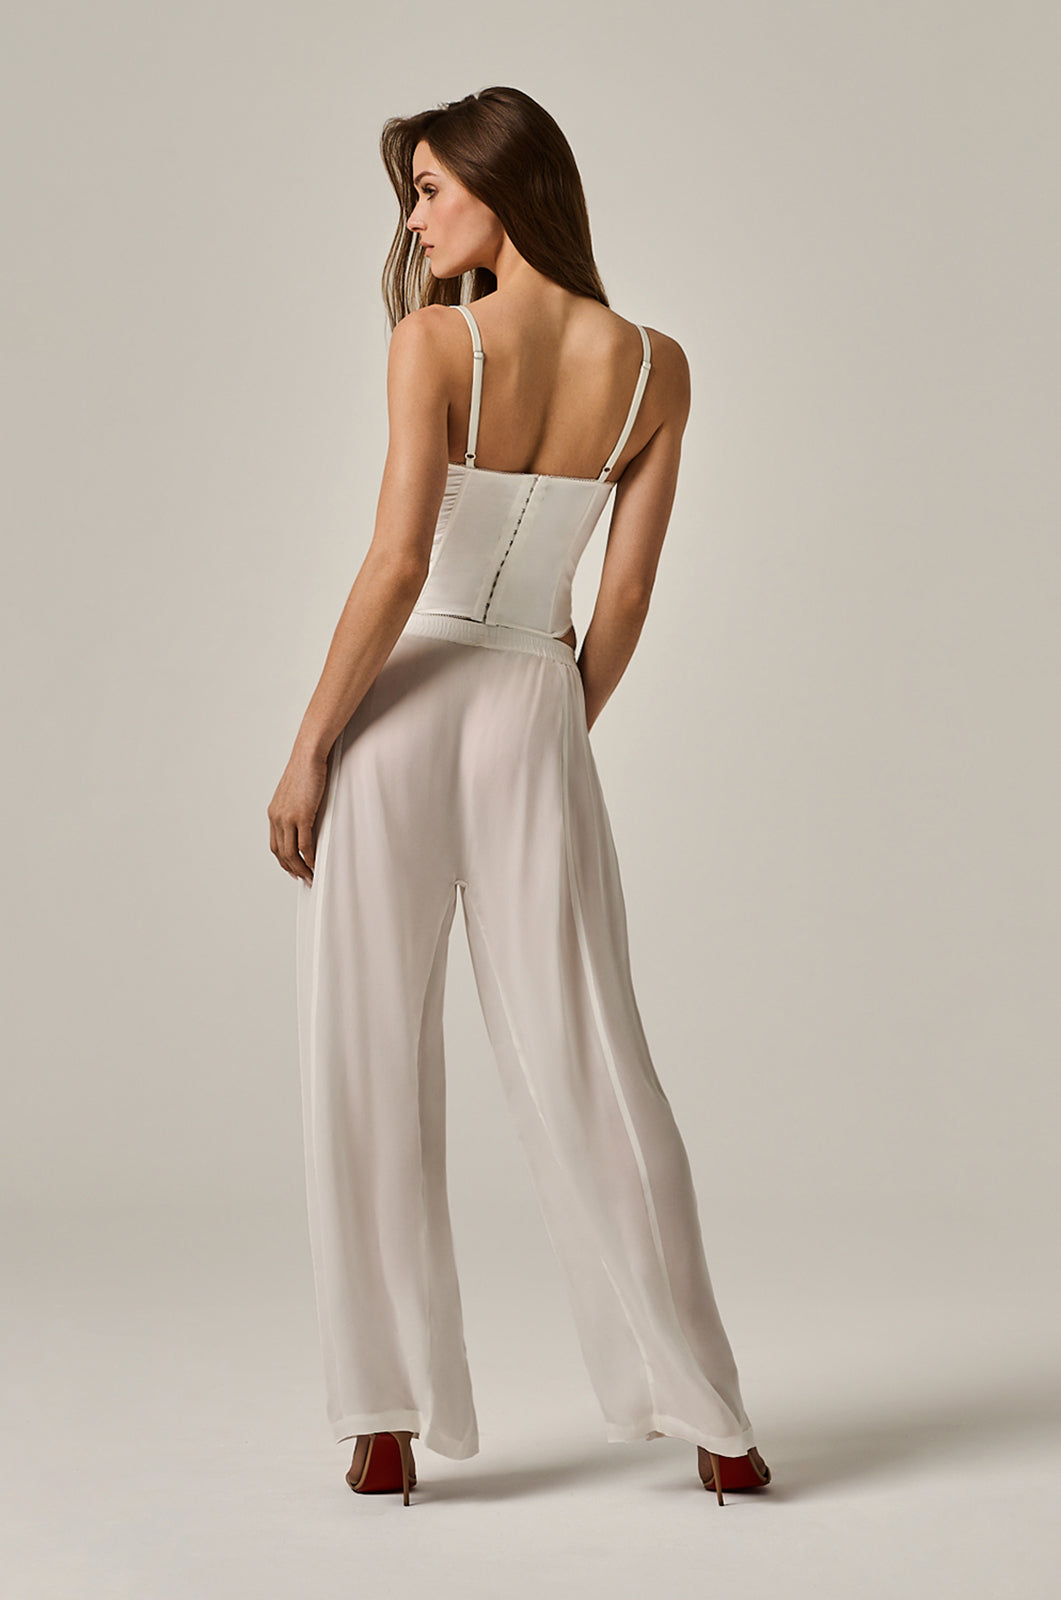 flowy semi-transparent long boxer pant with two buttons at front crotch area